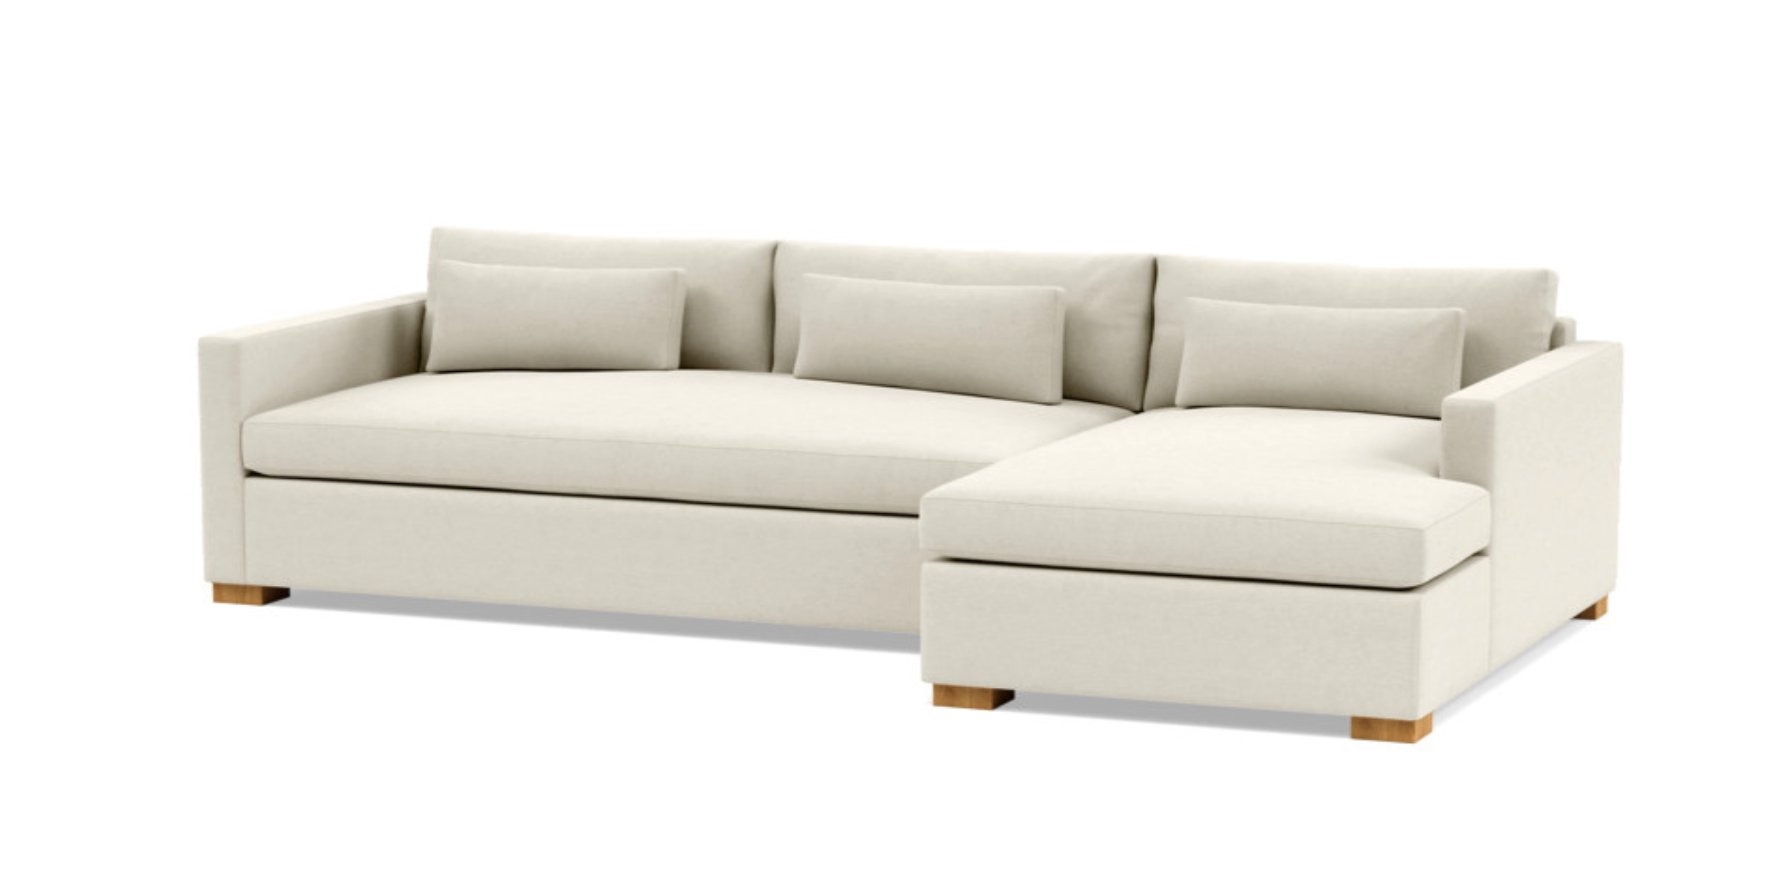 Charly Sleeper Sleeper Sectional with Chalk Fabric, standard chaise, and Matte Black legs right facing - Image 0